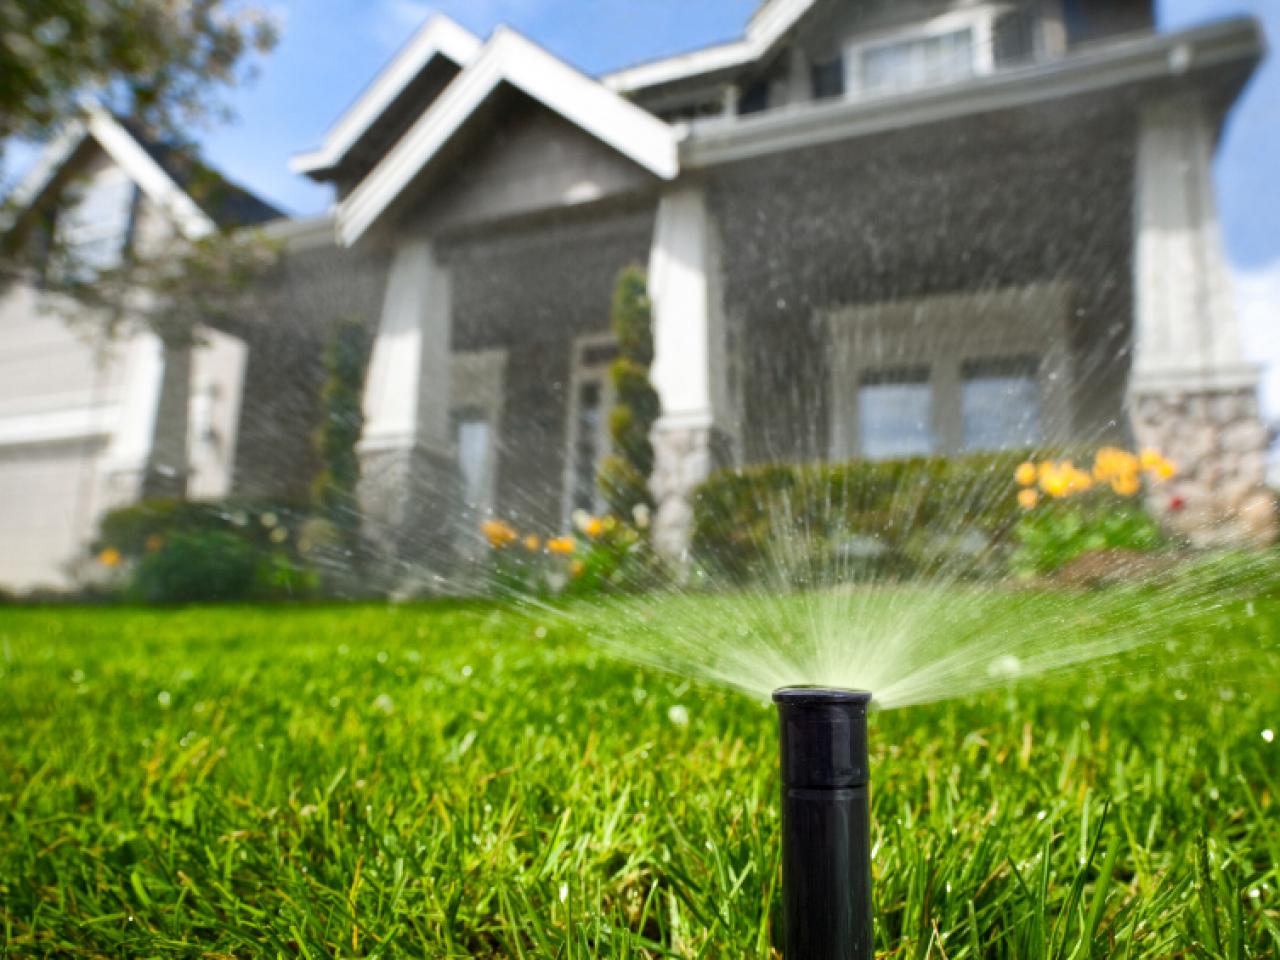 Choosing the Right Type of Sprinkler Head for Your Lawn